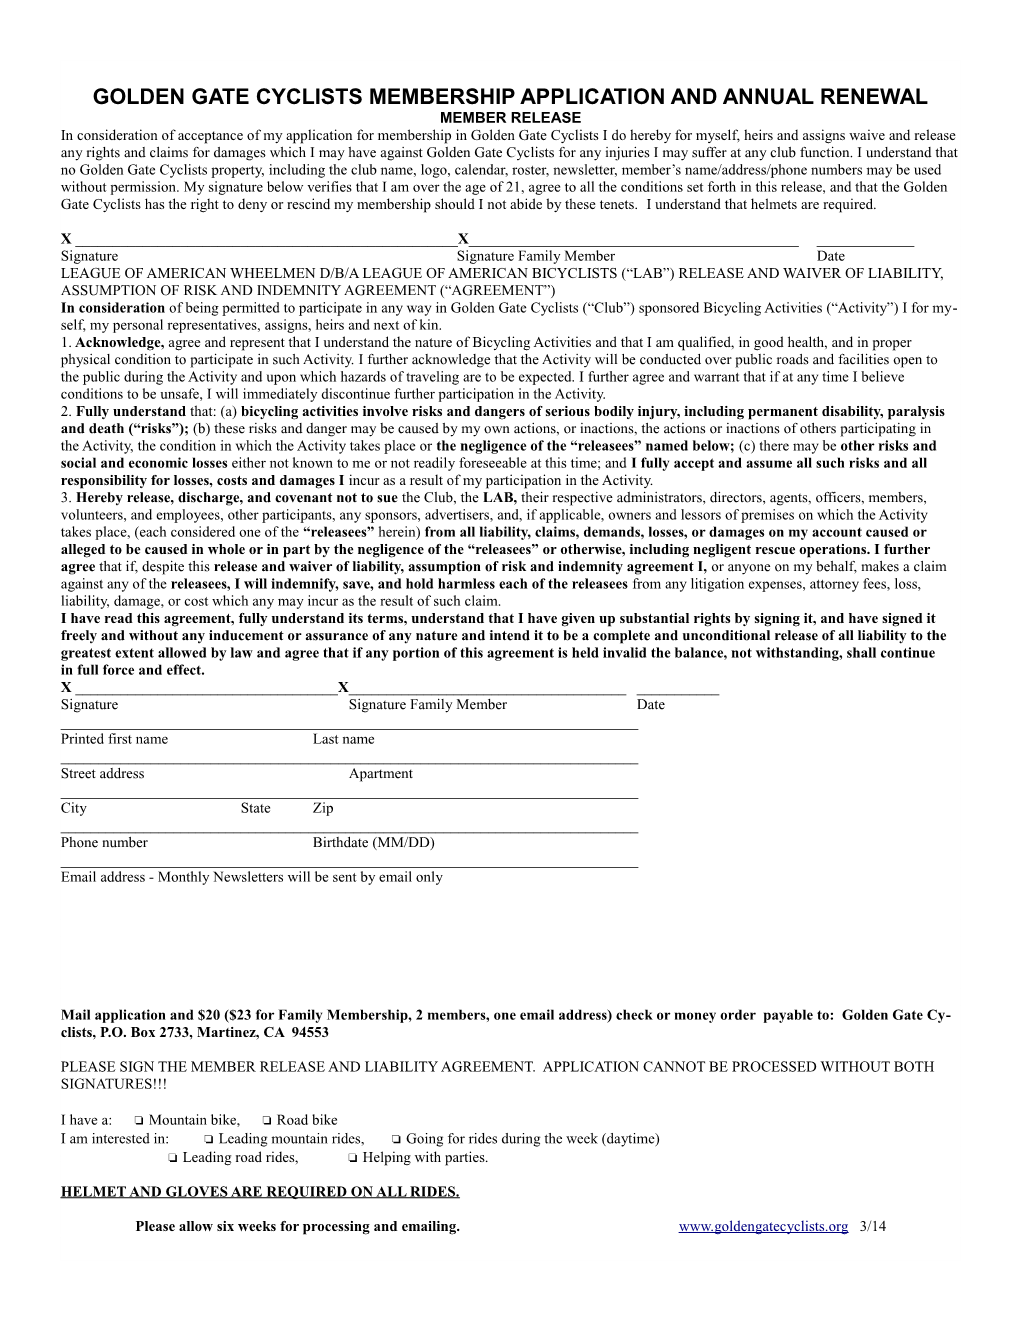 Golden Gate Cyclists Membership Application and Annual Renewal